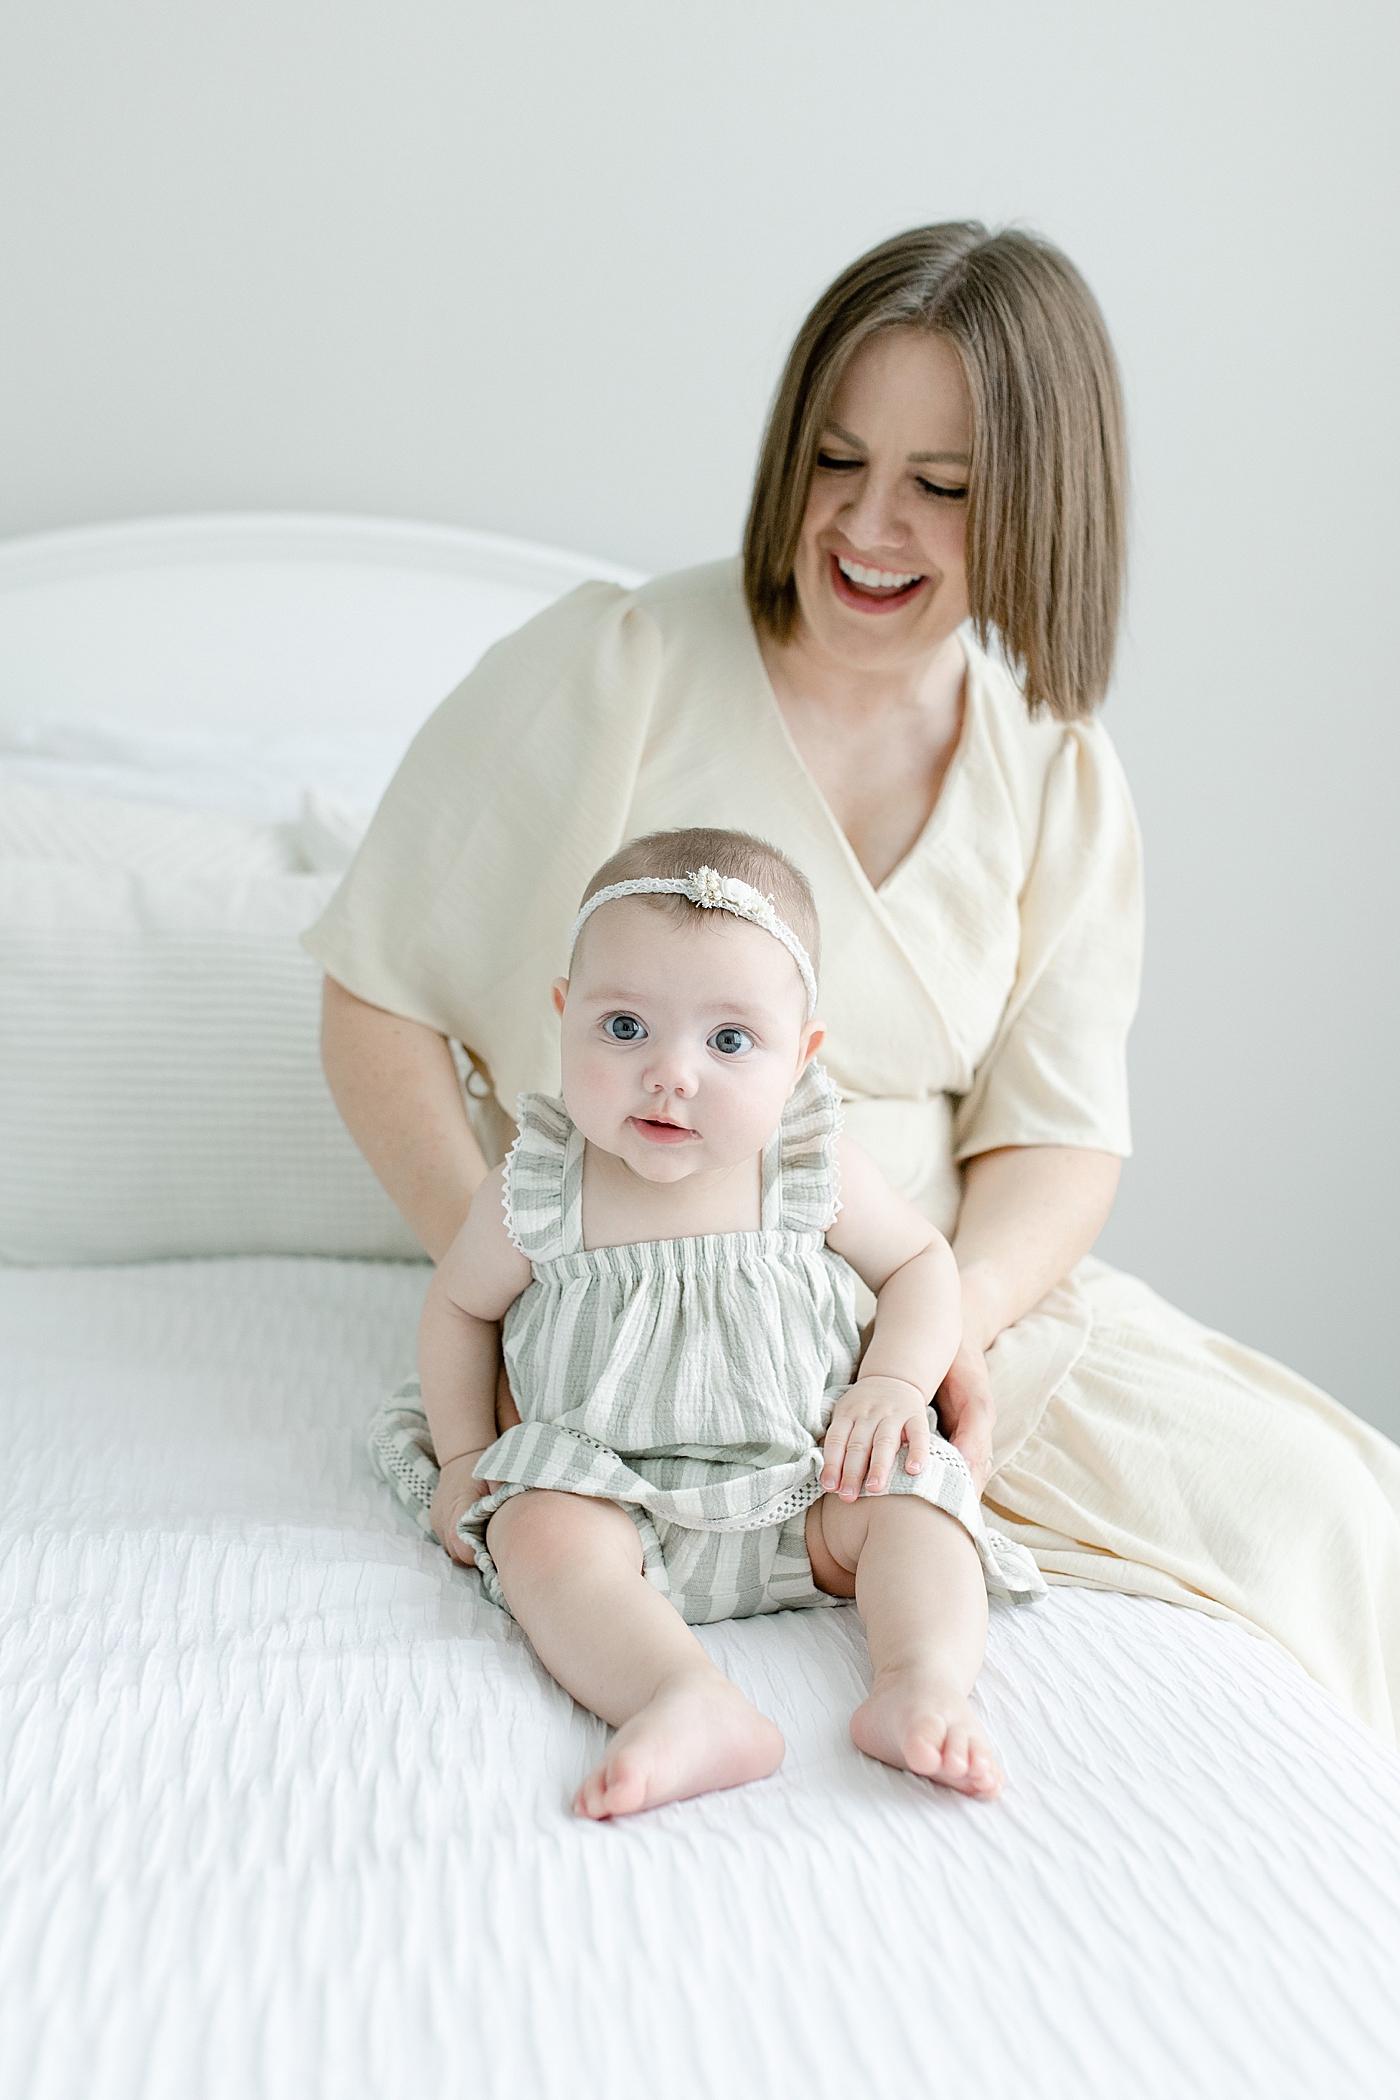 Baby girl in striped sitting up with mom | Photo by Hattiesburg MS Baby Photographer Little Sunshine Photography